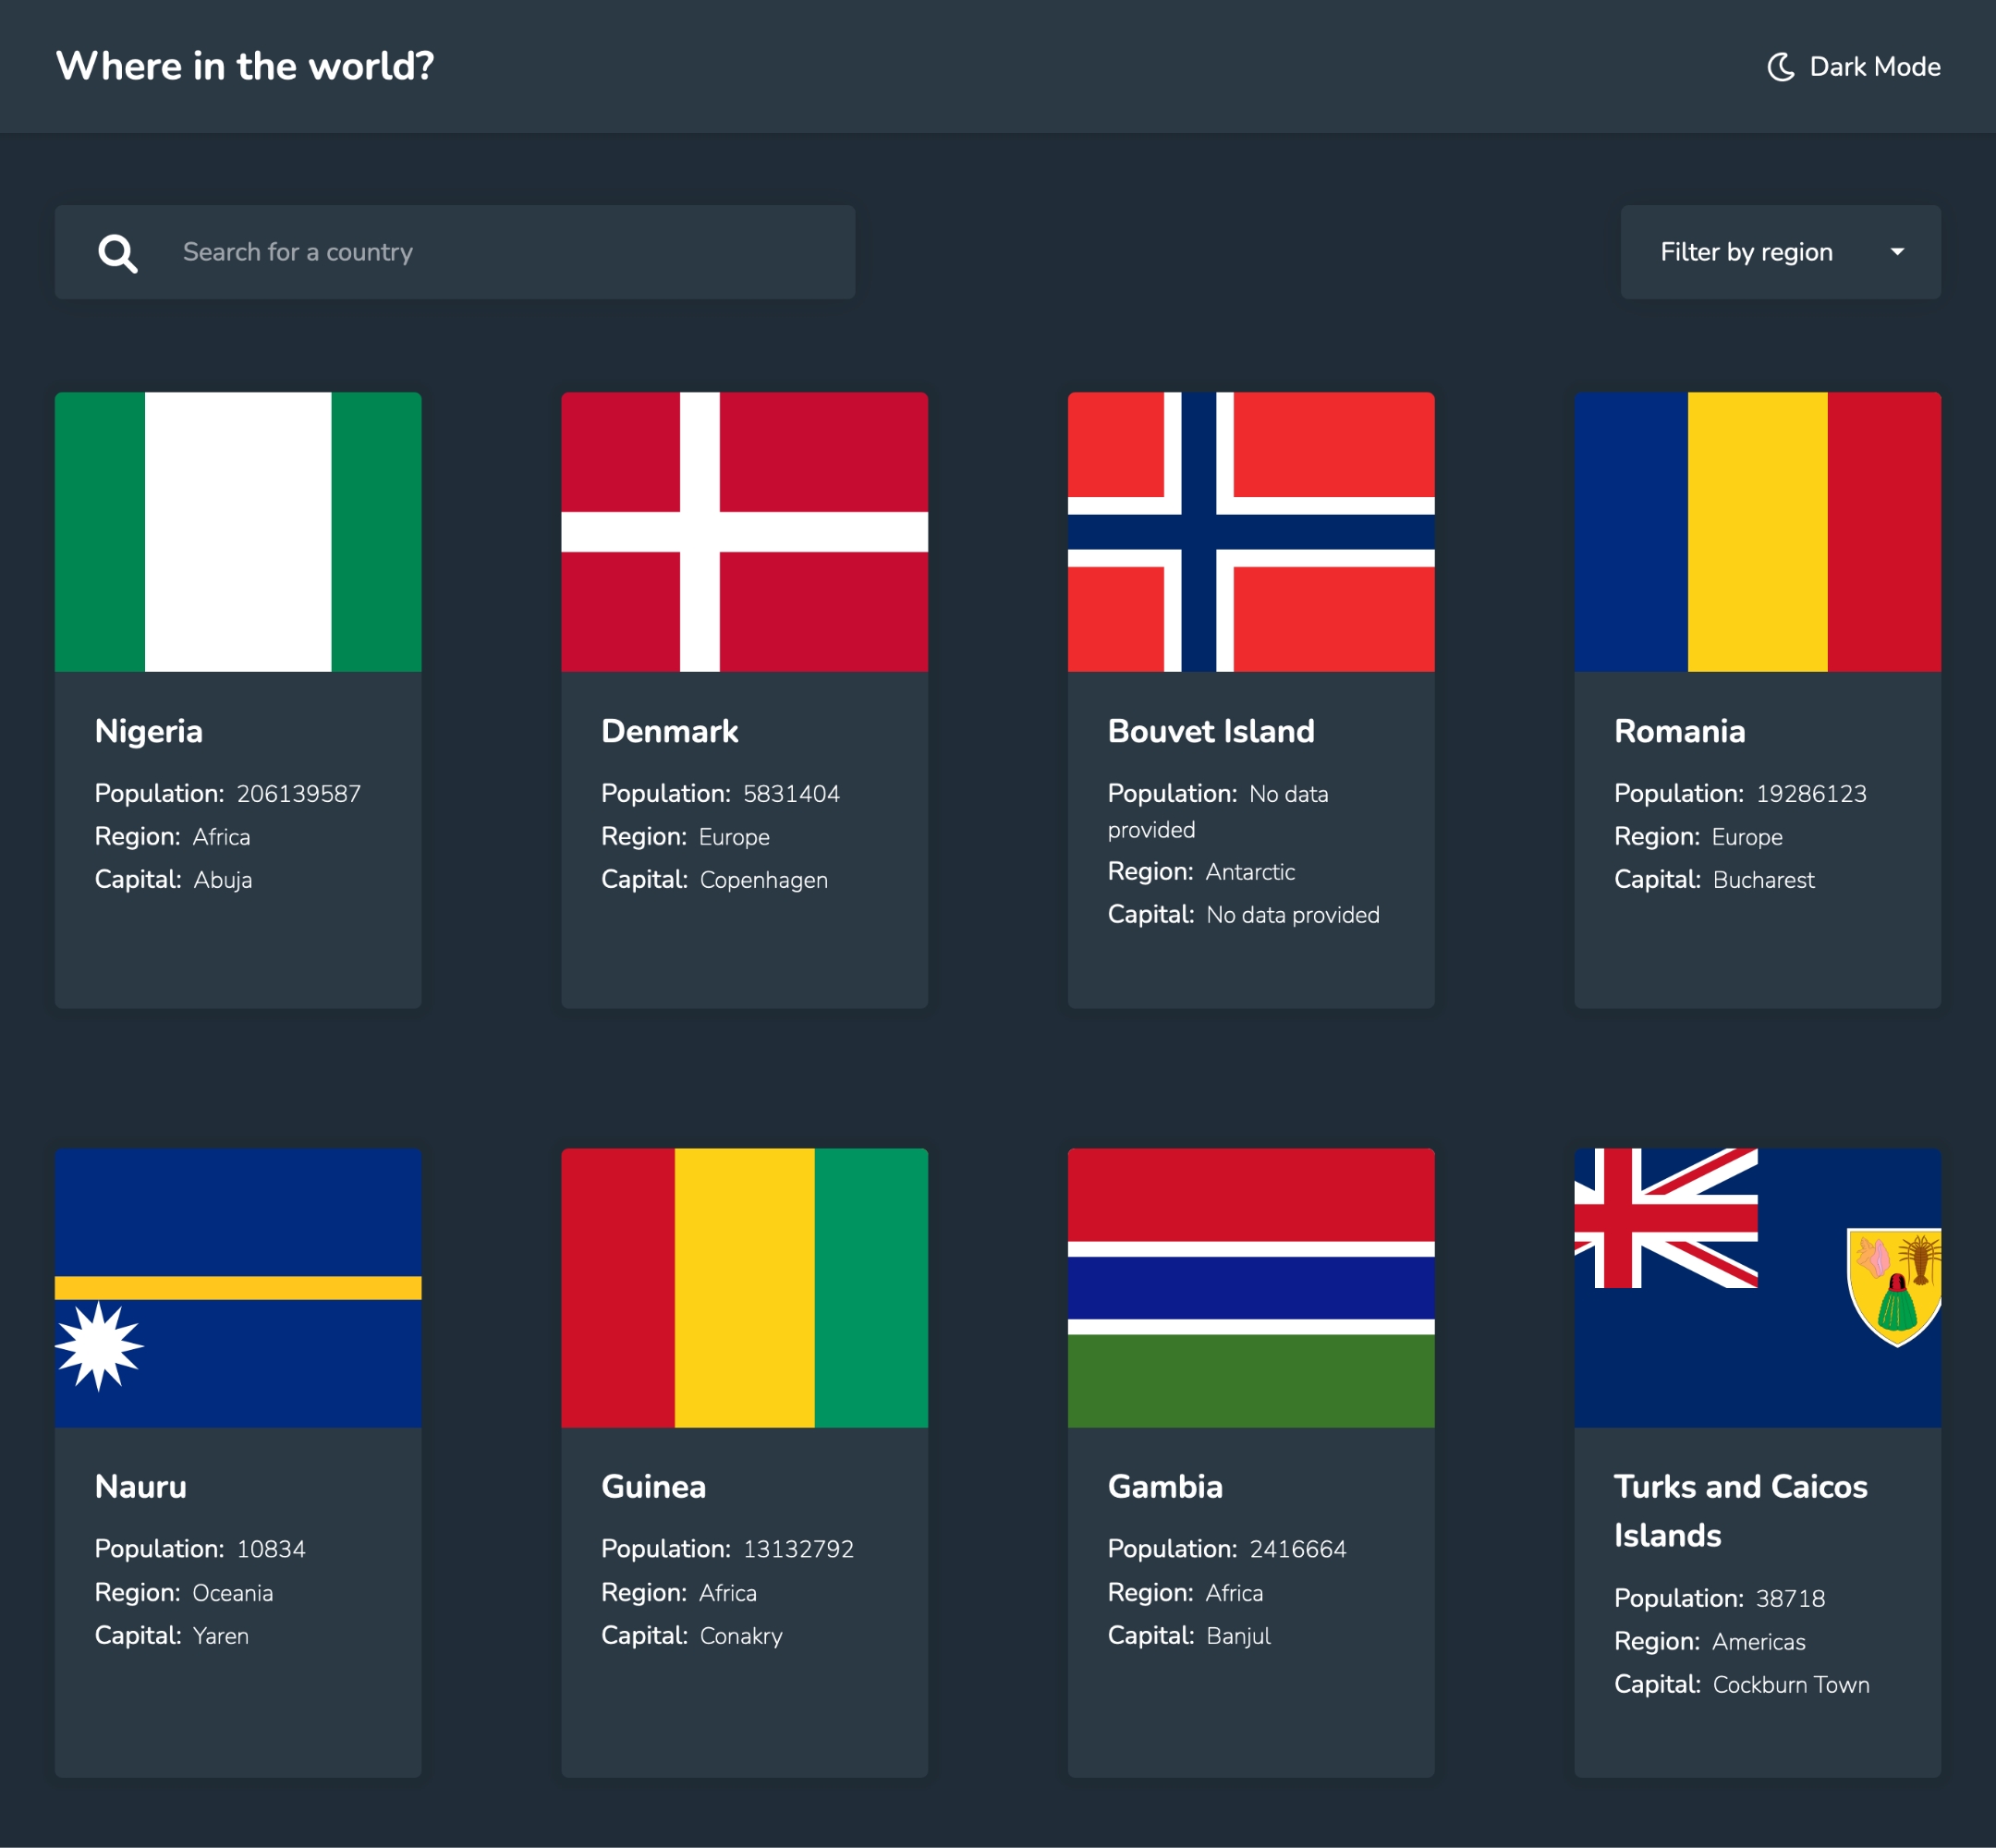 Screenshot of the desktop version of the Countries App, a web application that allows users to search for countries and learn more about them